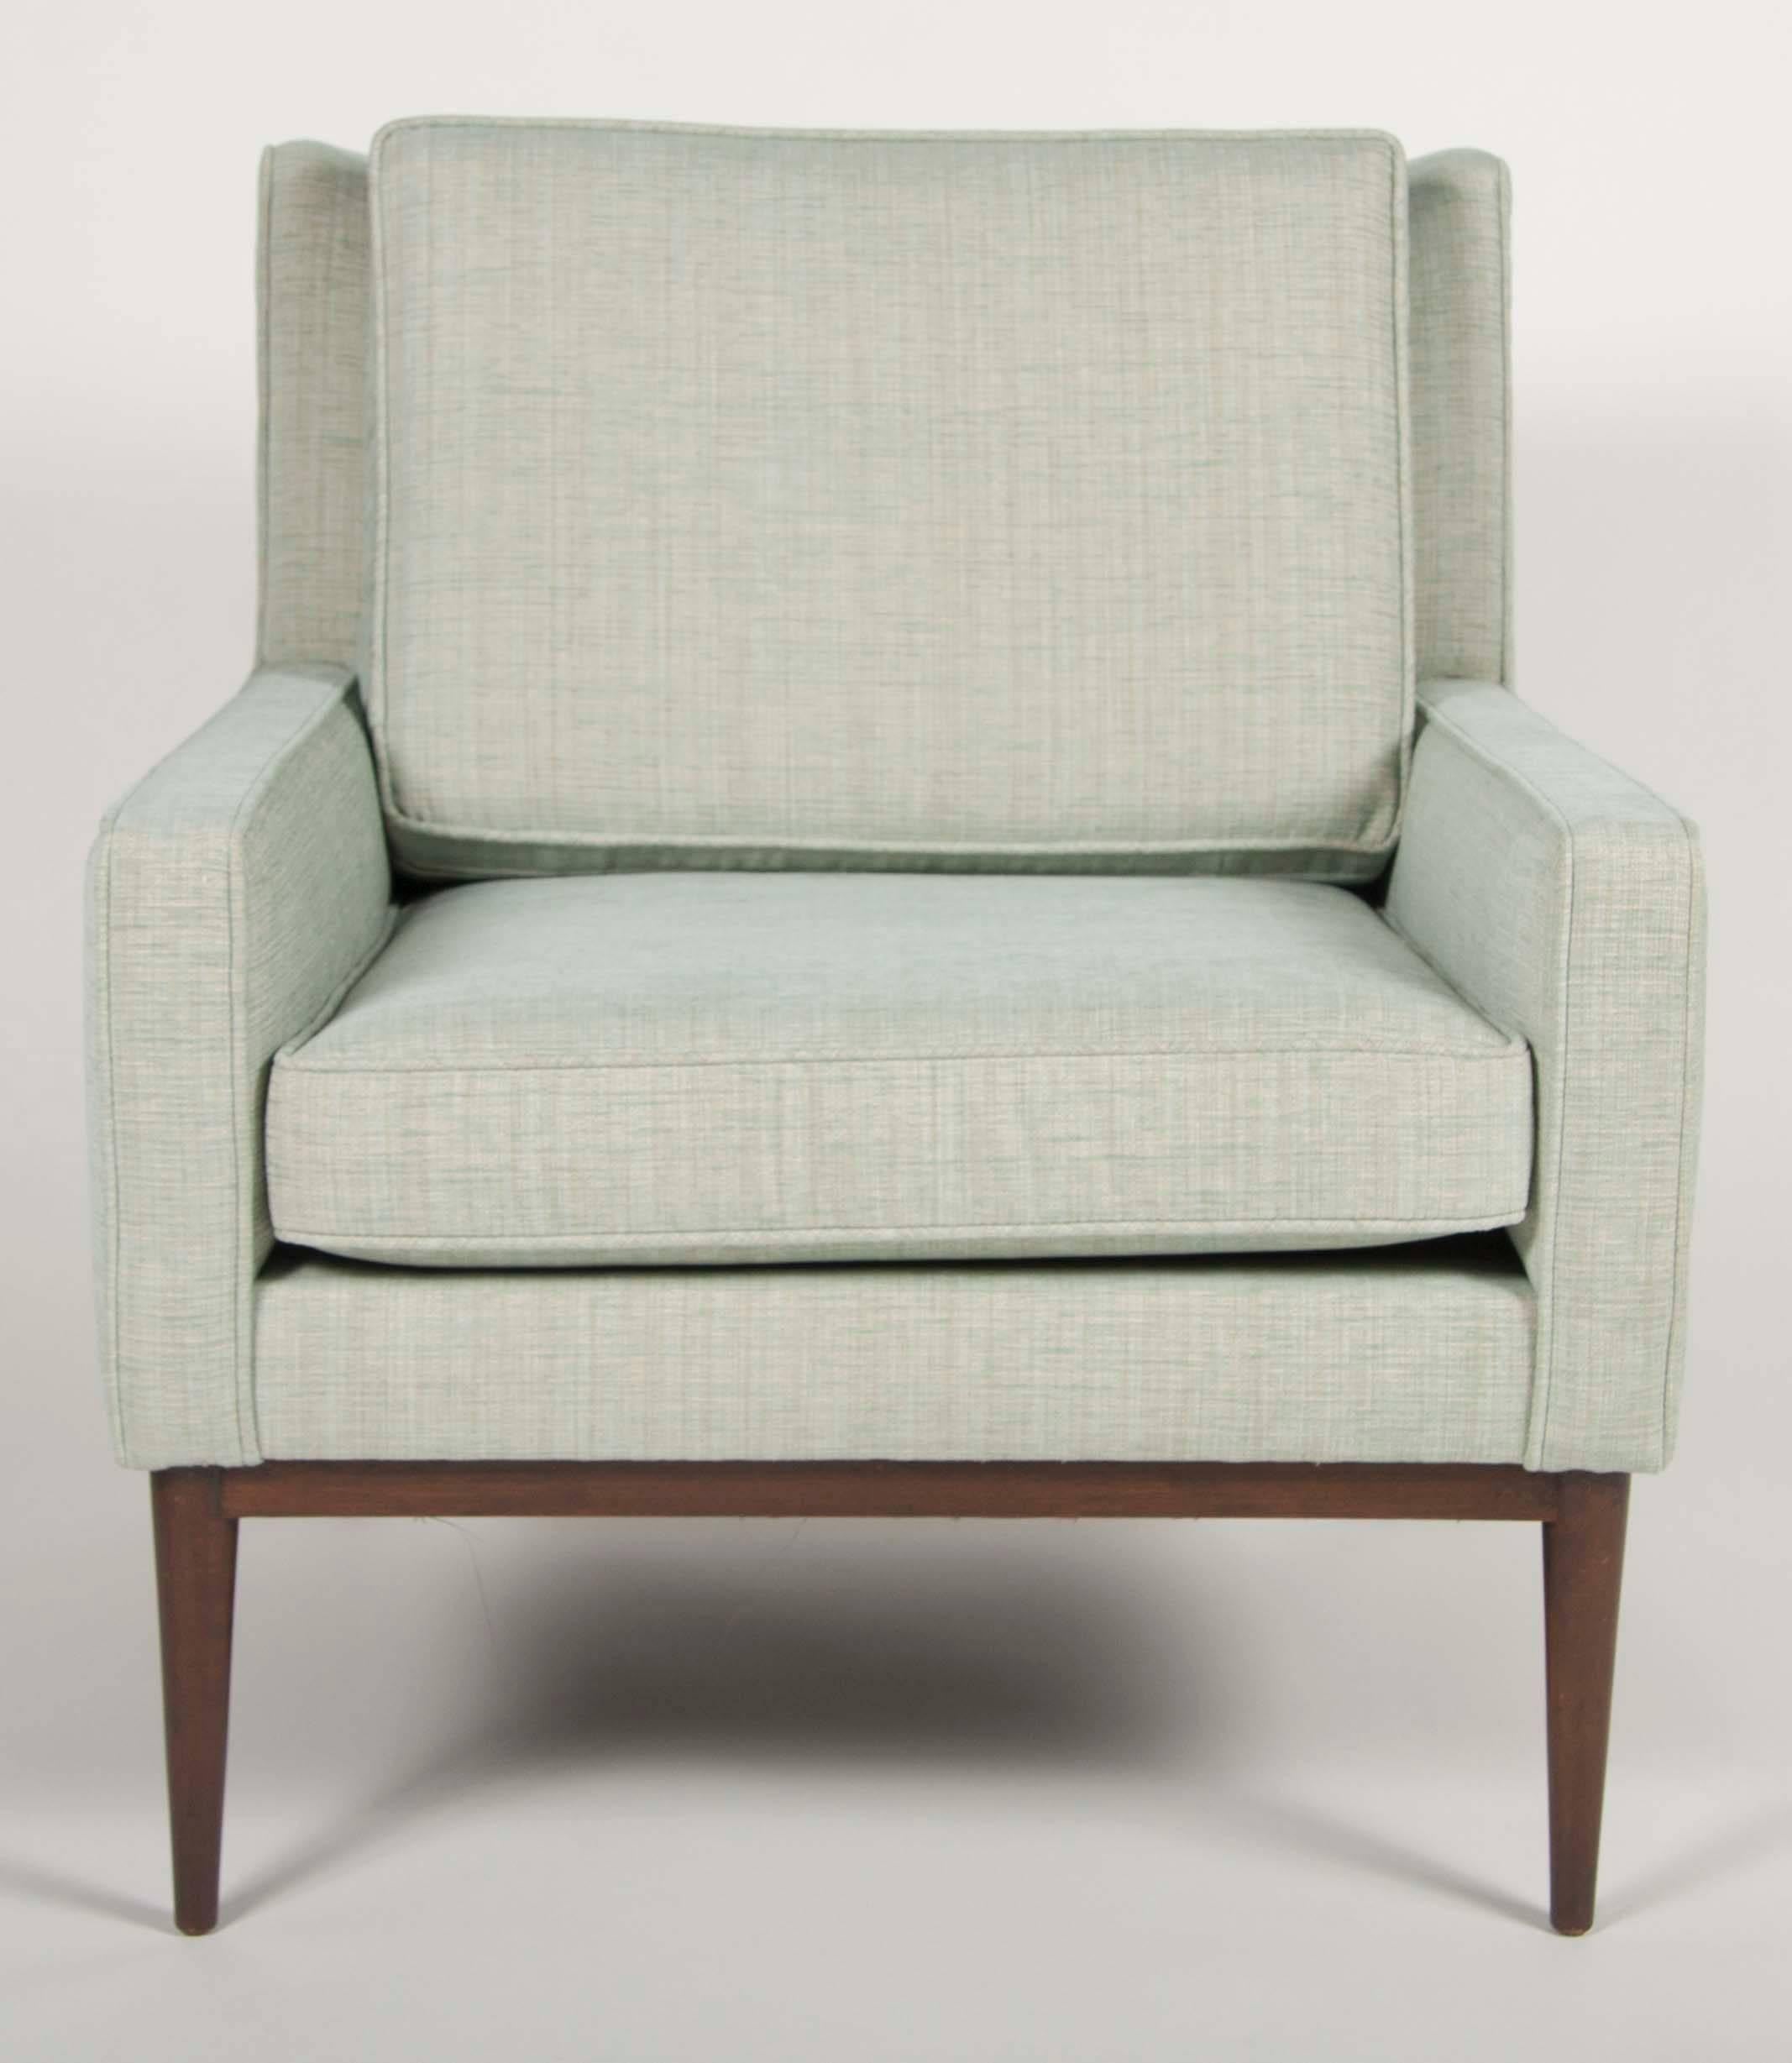 A newly upholstered armchair designed by Paul McCobb having walnut legs and apron.